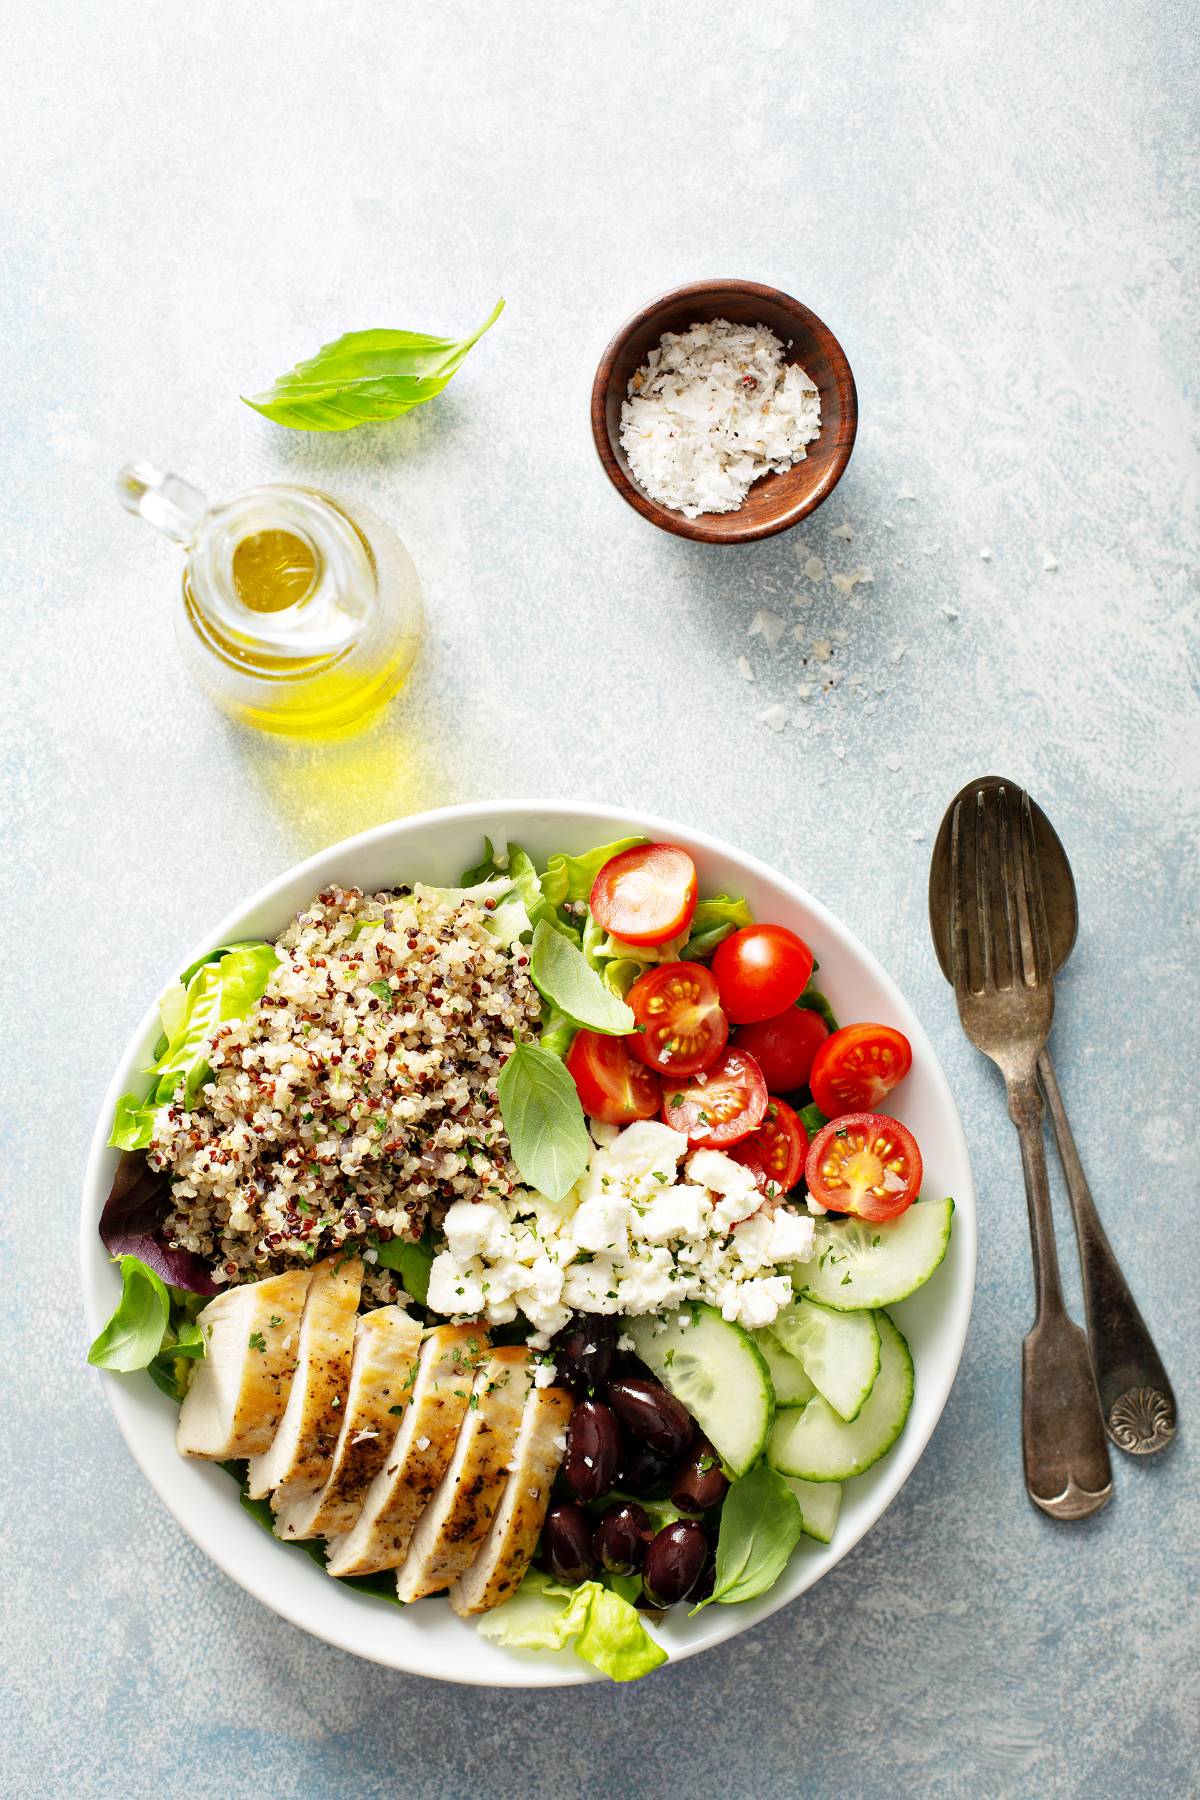 Quick And Healthy Lunch Ideas For Your Next Event: Top 15